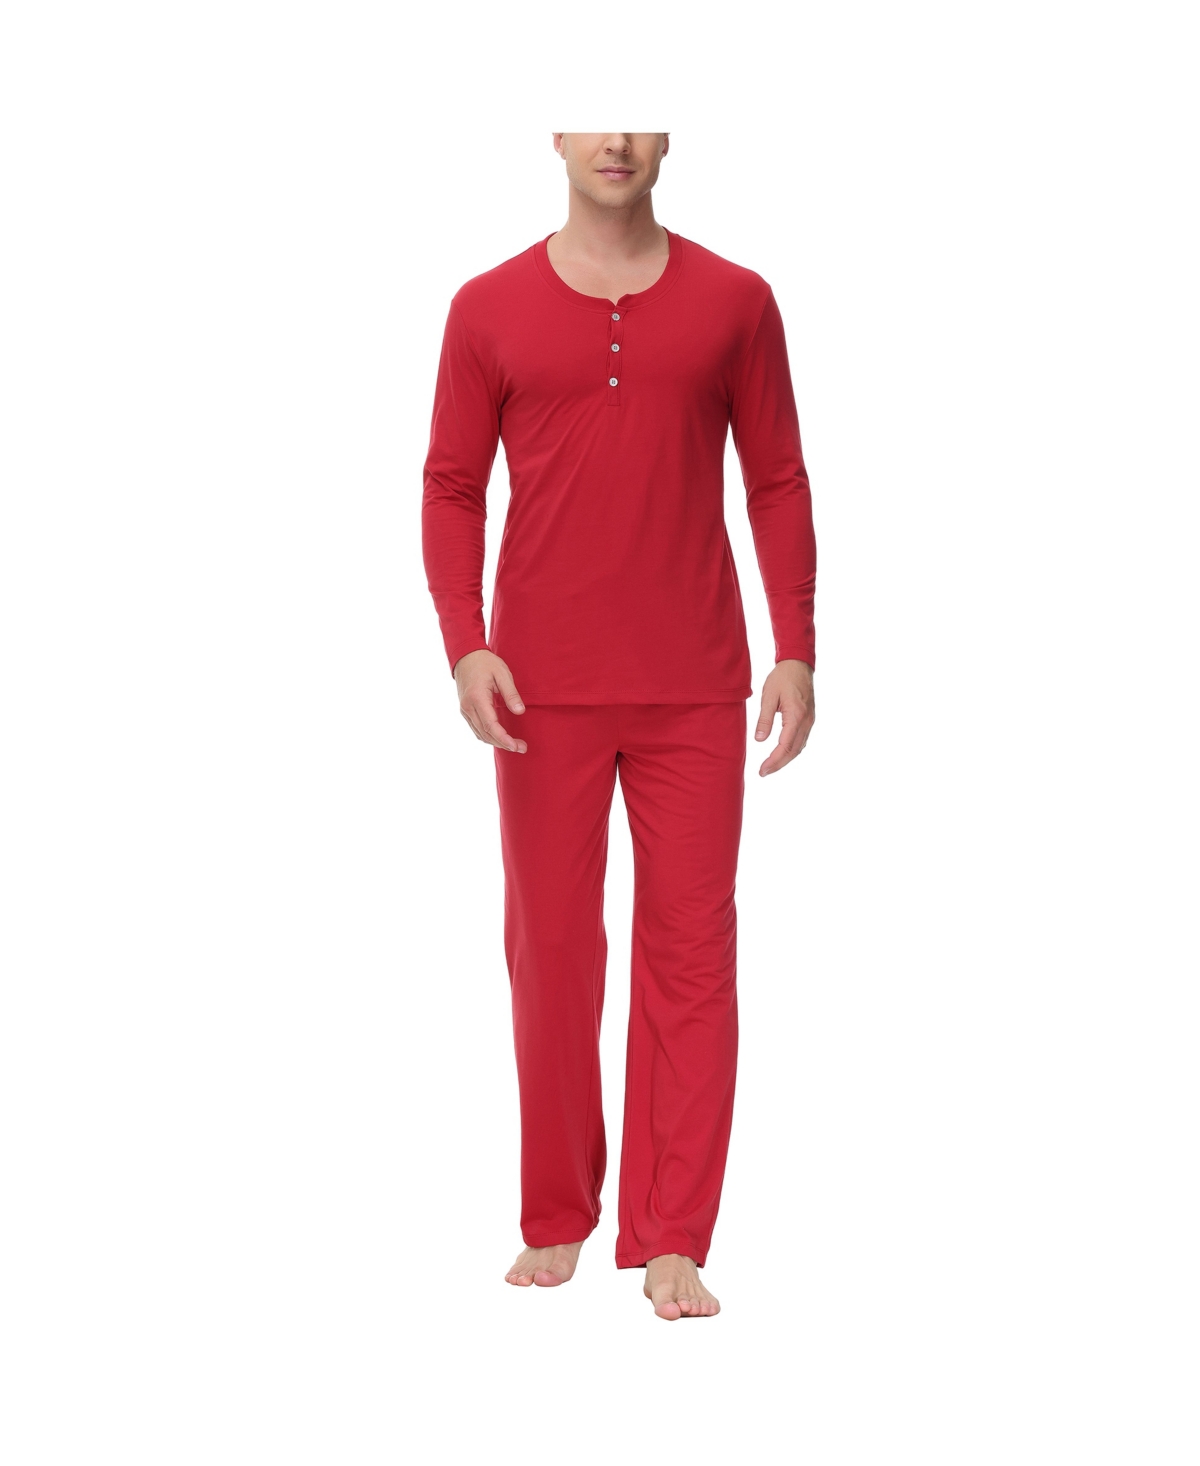 Men's Two Piece Henley Pajama Set - Red